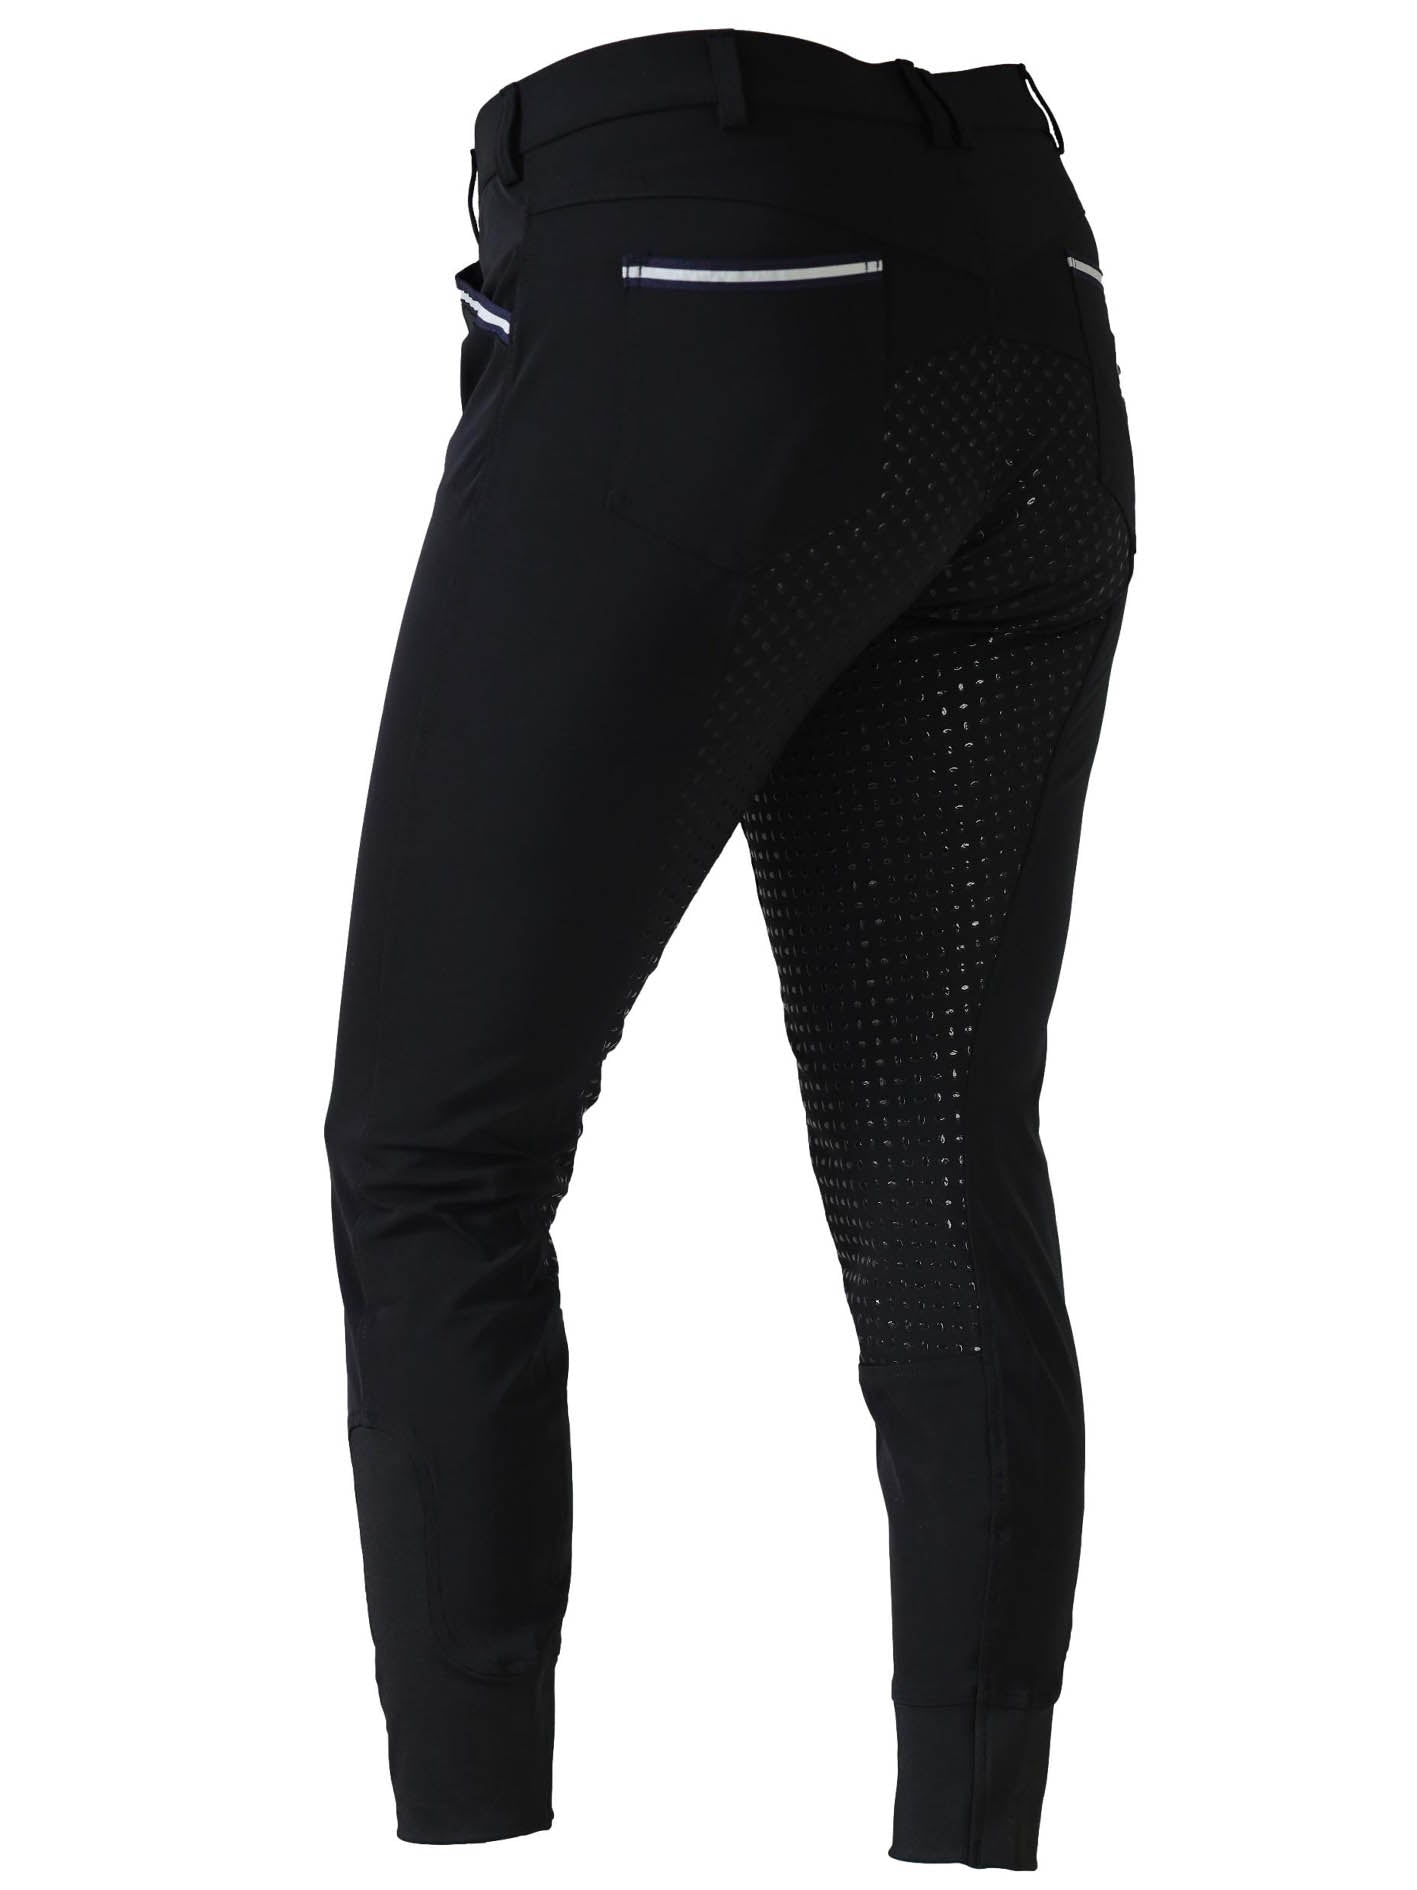 CoolMax Black Breeches in sizes 6 to 28 - With Silicone Seat Grip-Plum Tack-The Equestrian